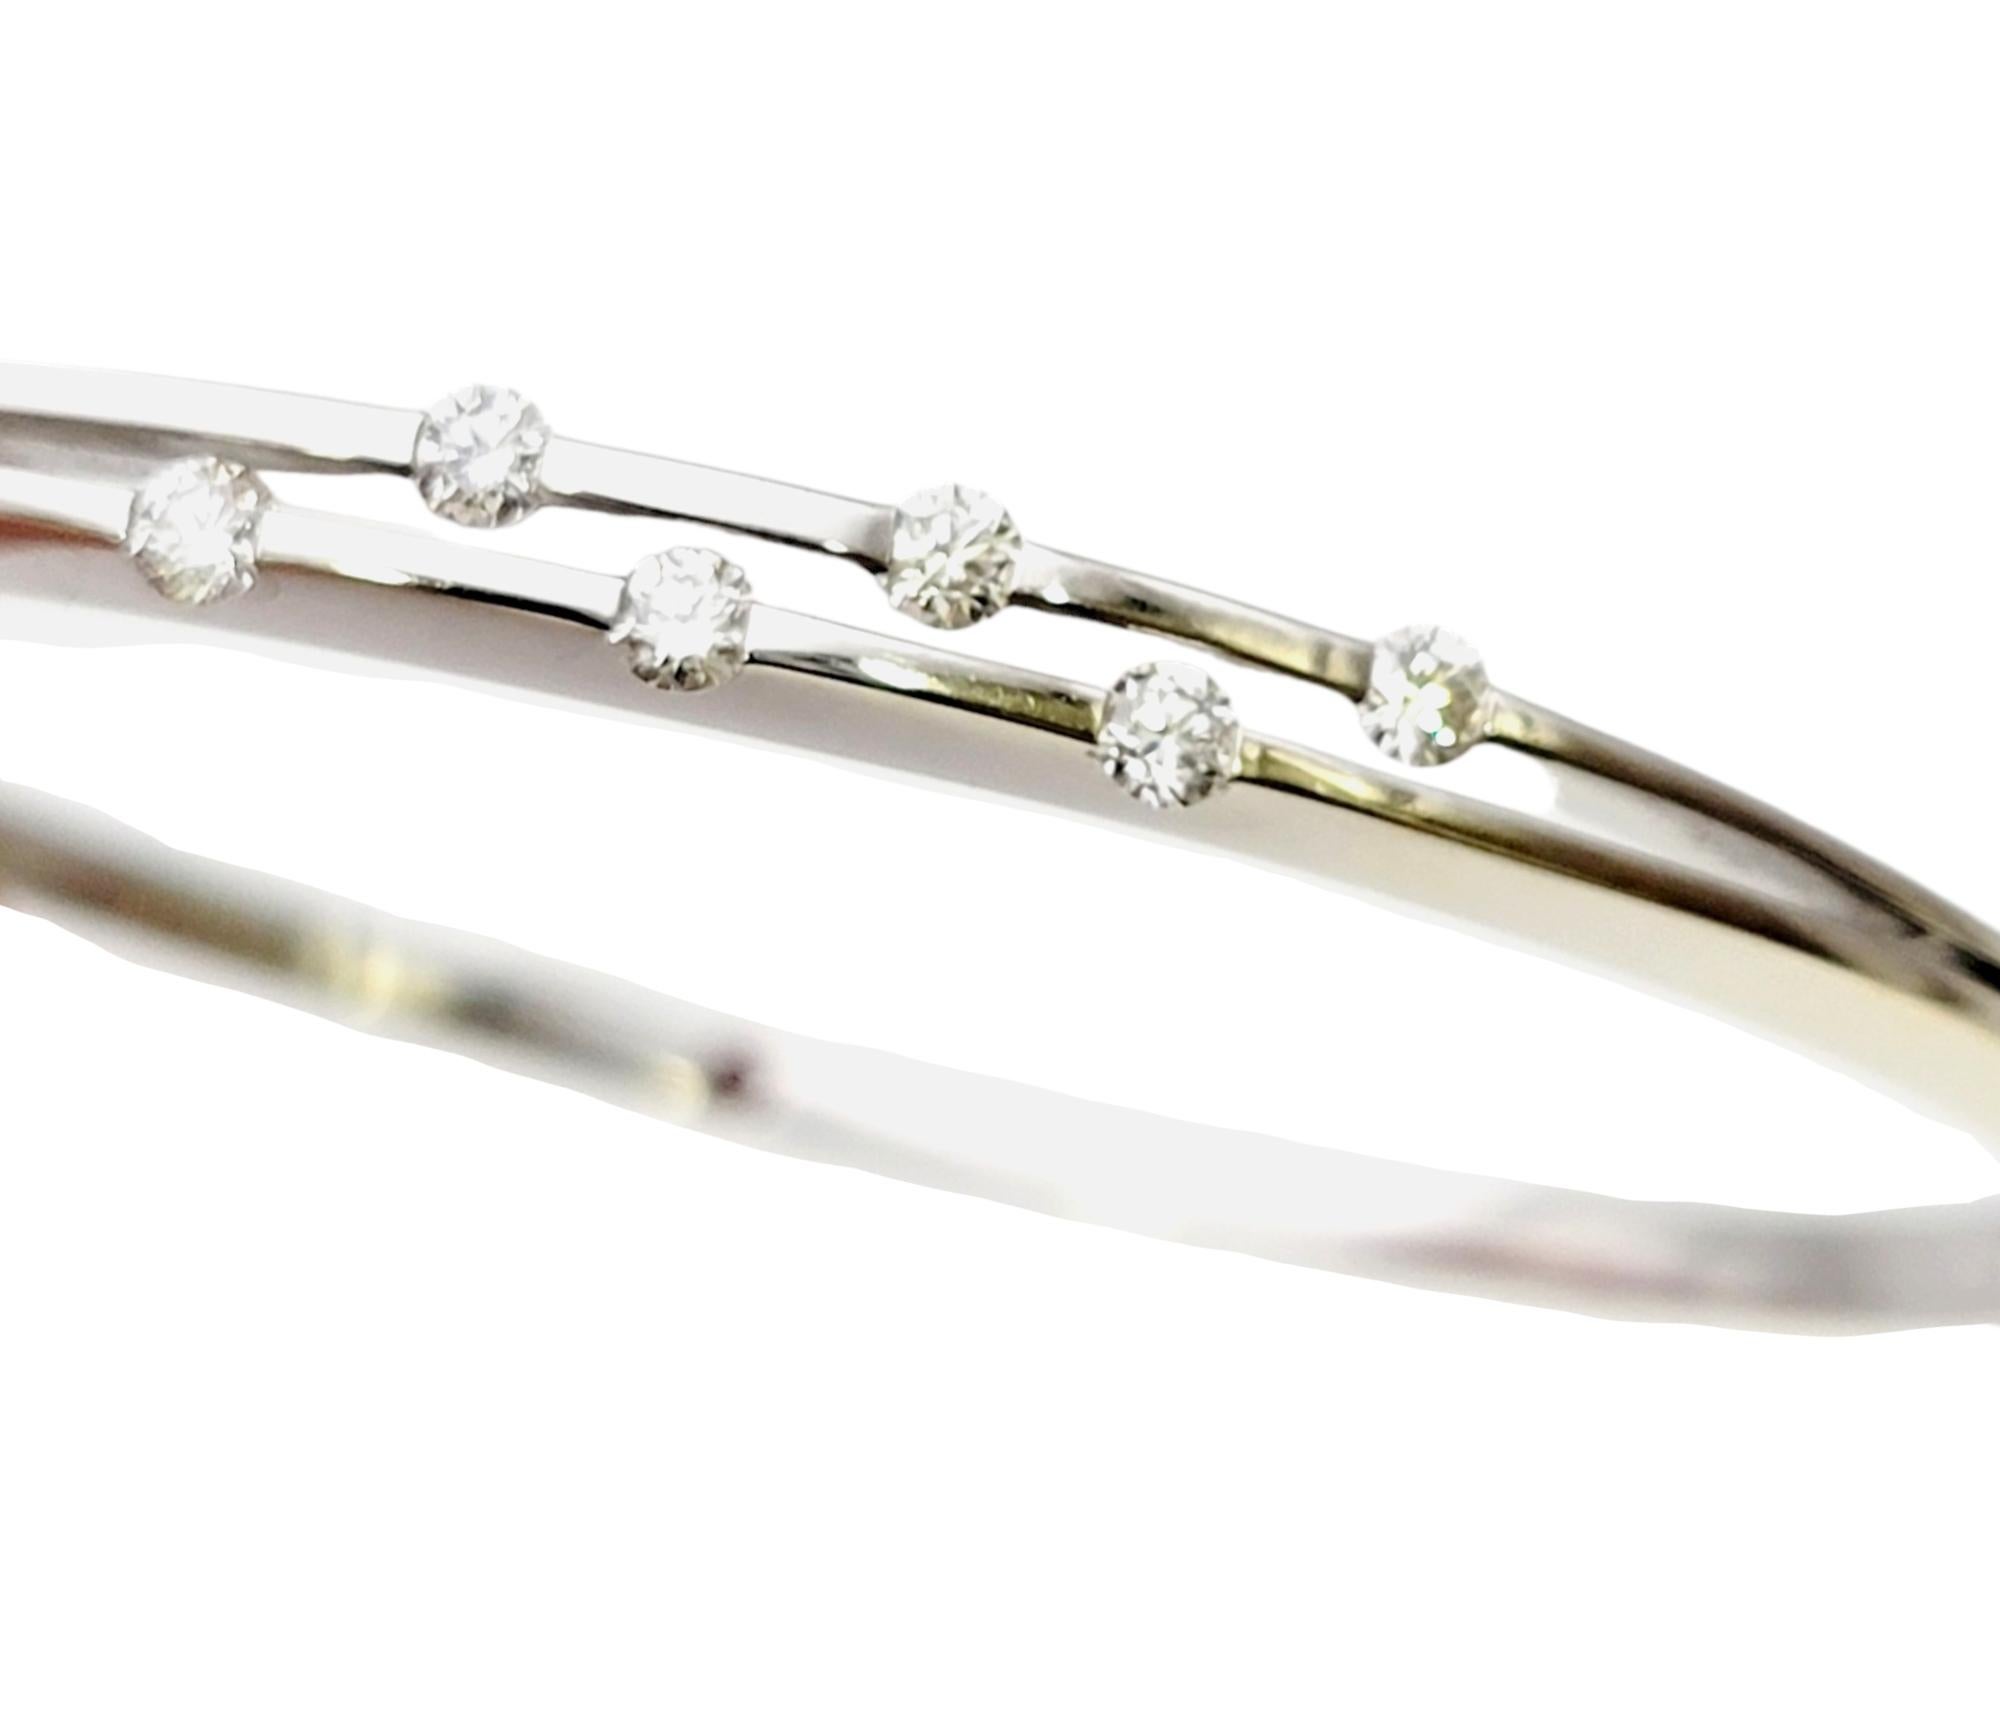 Simple yet stunning bracelet from Roberto Coin's Classica Parisienne  collection. Uncomplicated with a modern appeal, this sleek bangle exudes luxury and style.

This contemporary bracelet features a polished 18 karat white gold bangle embellished